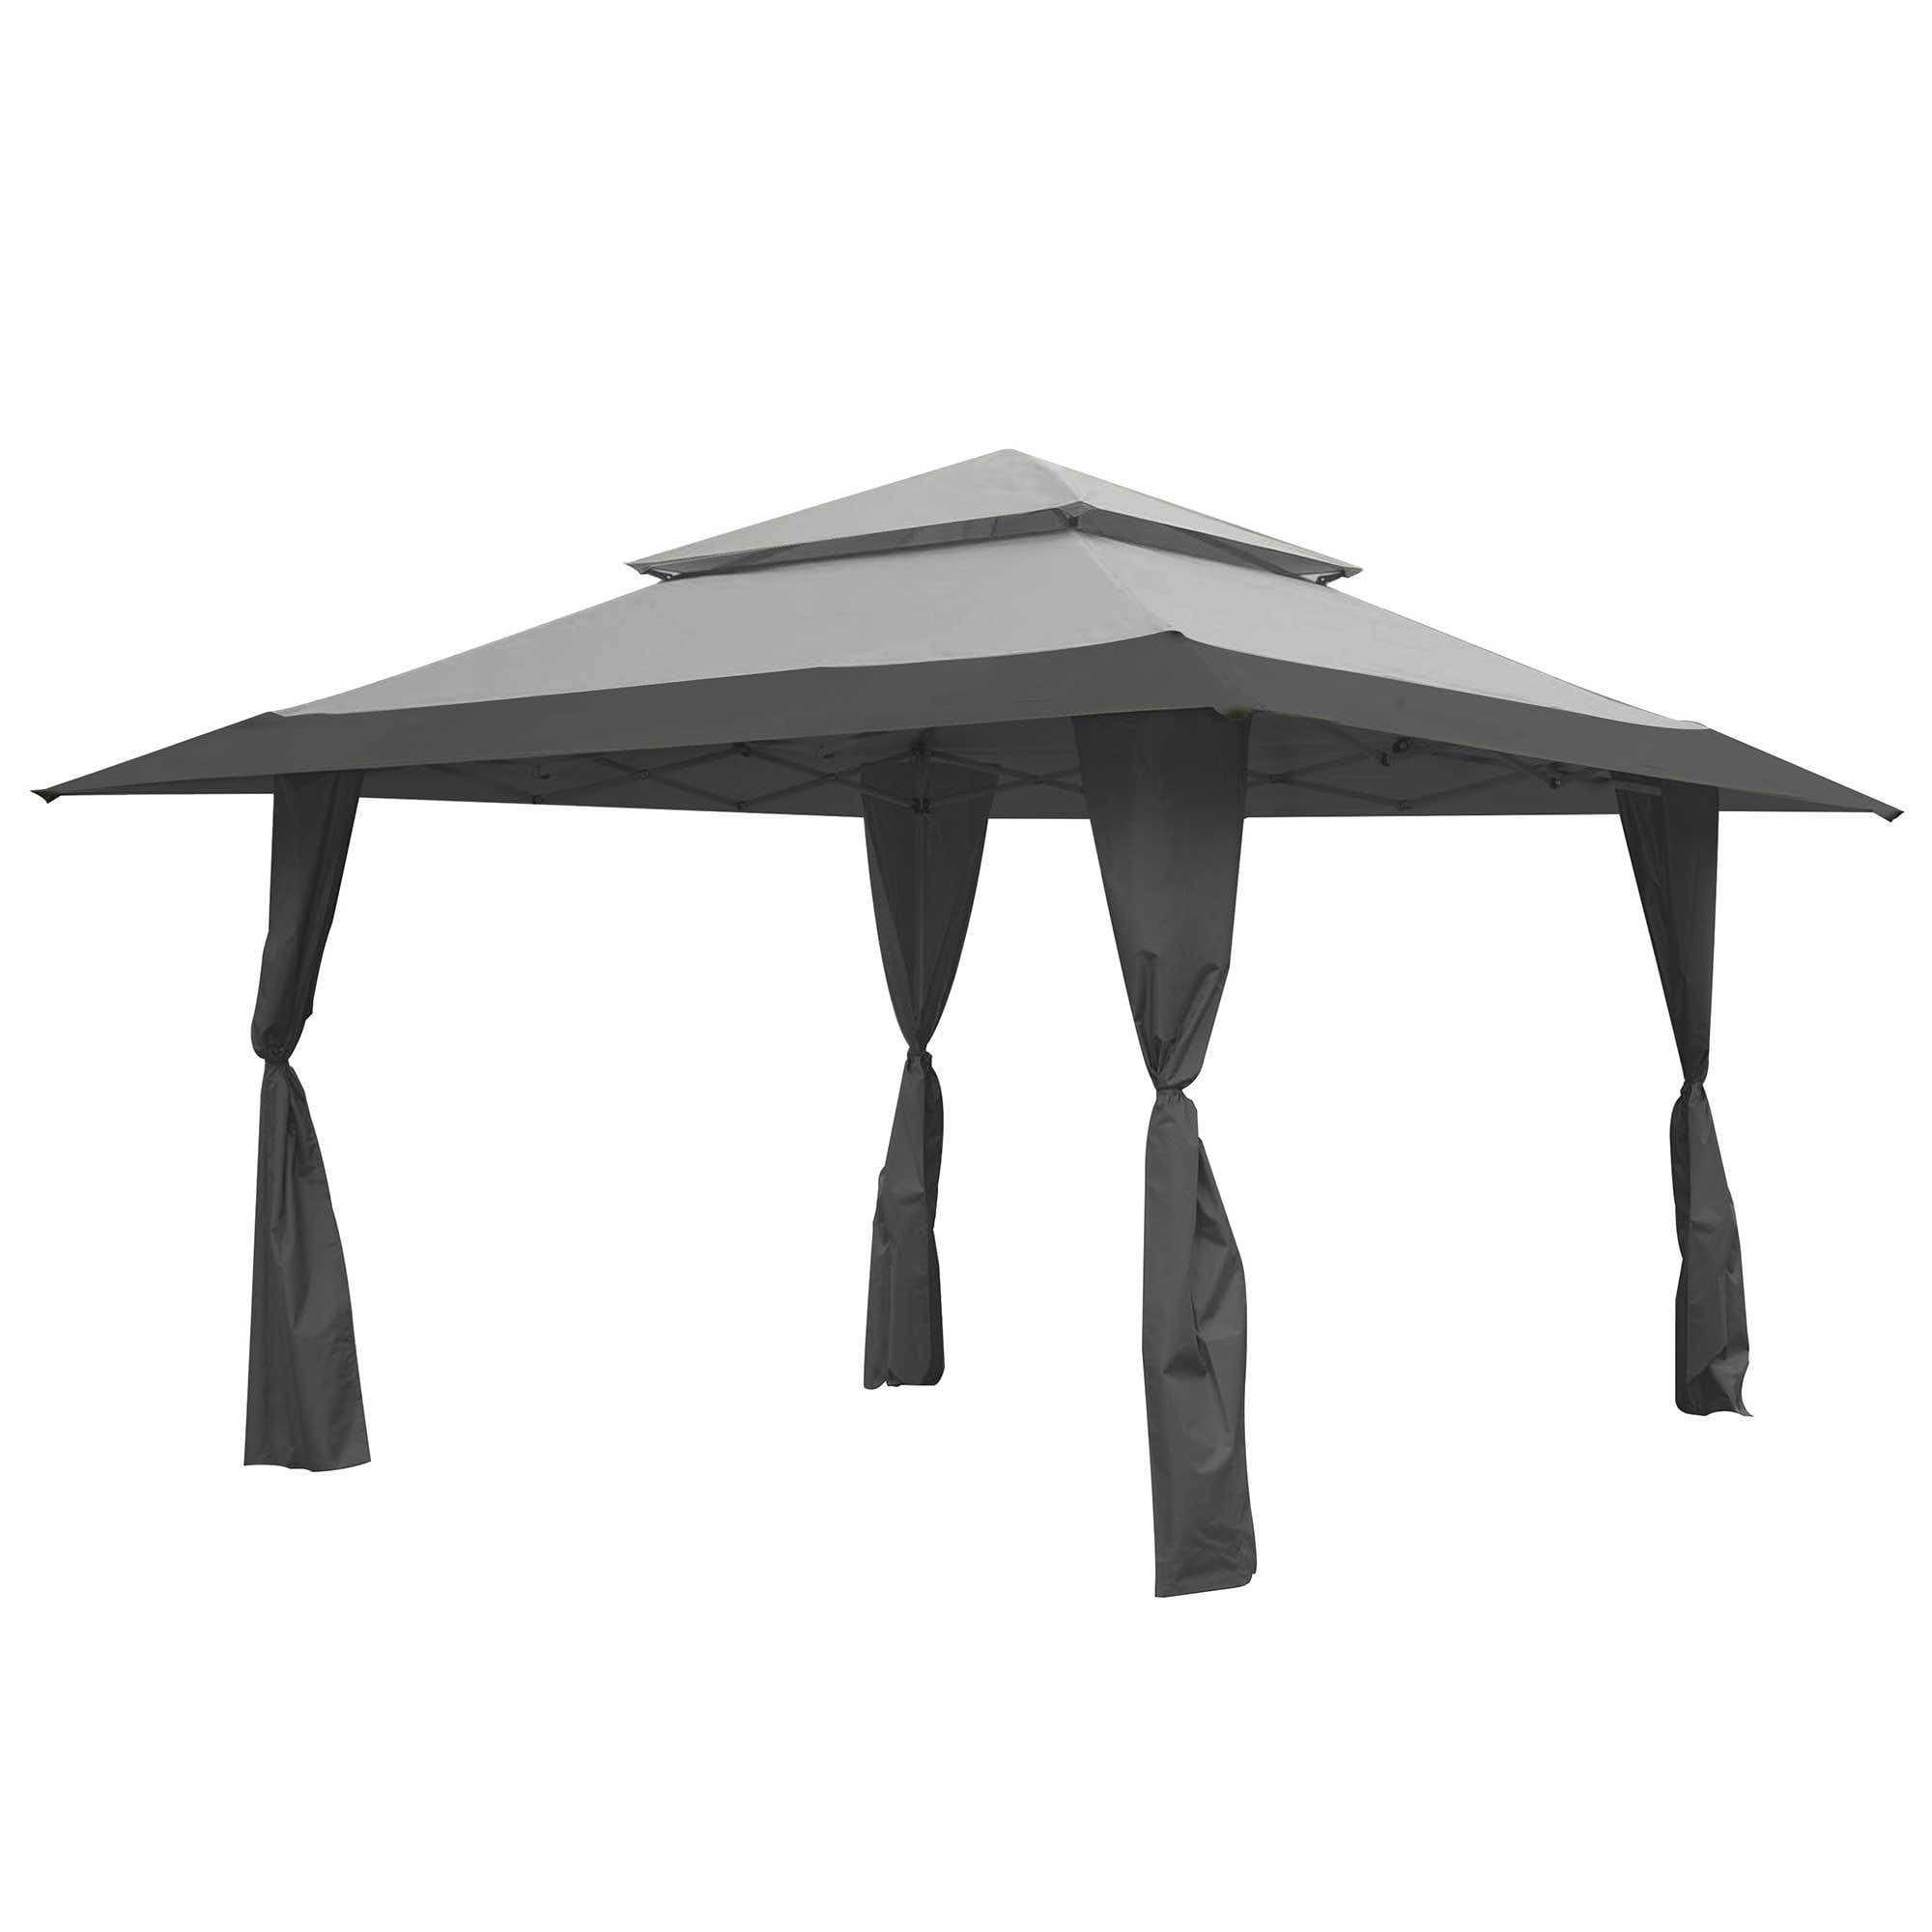 Z-Shade 13'x13' Instant Gazebo Canopy Tent Outdoor Patio Shelter Gray 2 Pack 